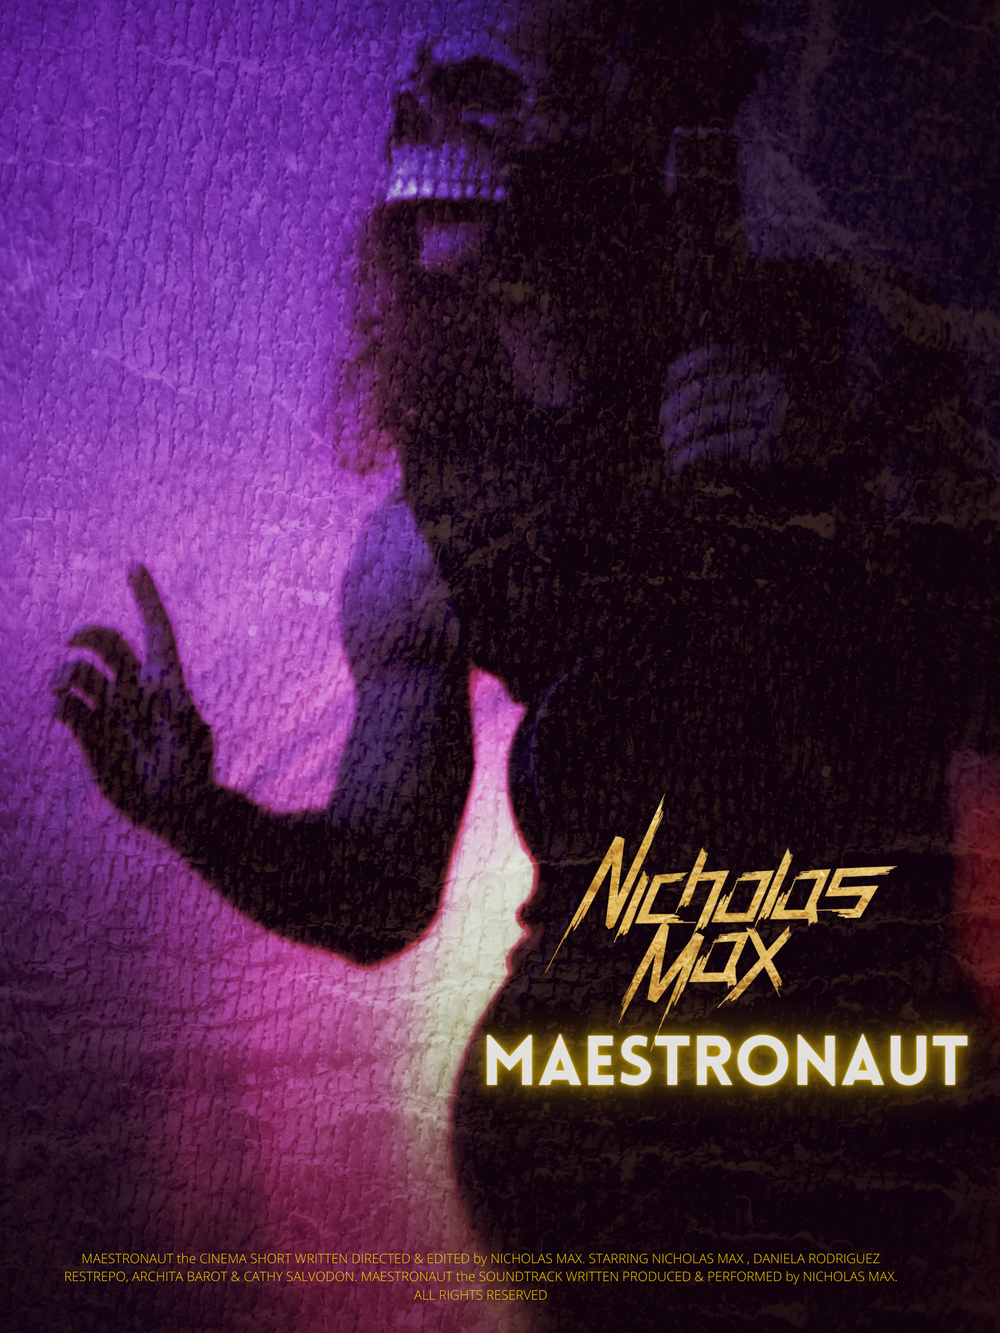 MAESTRONAUT NICHOLAS MAX ALL RIGHTS RESERVED